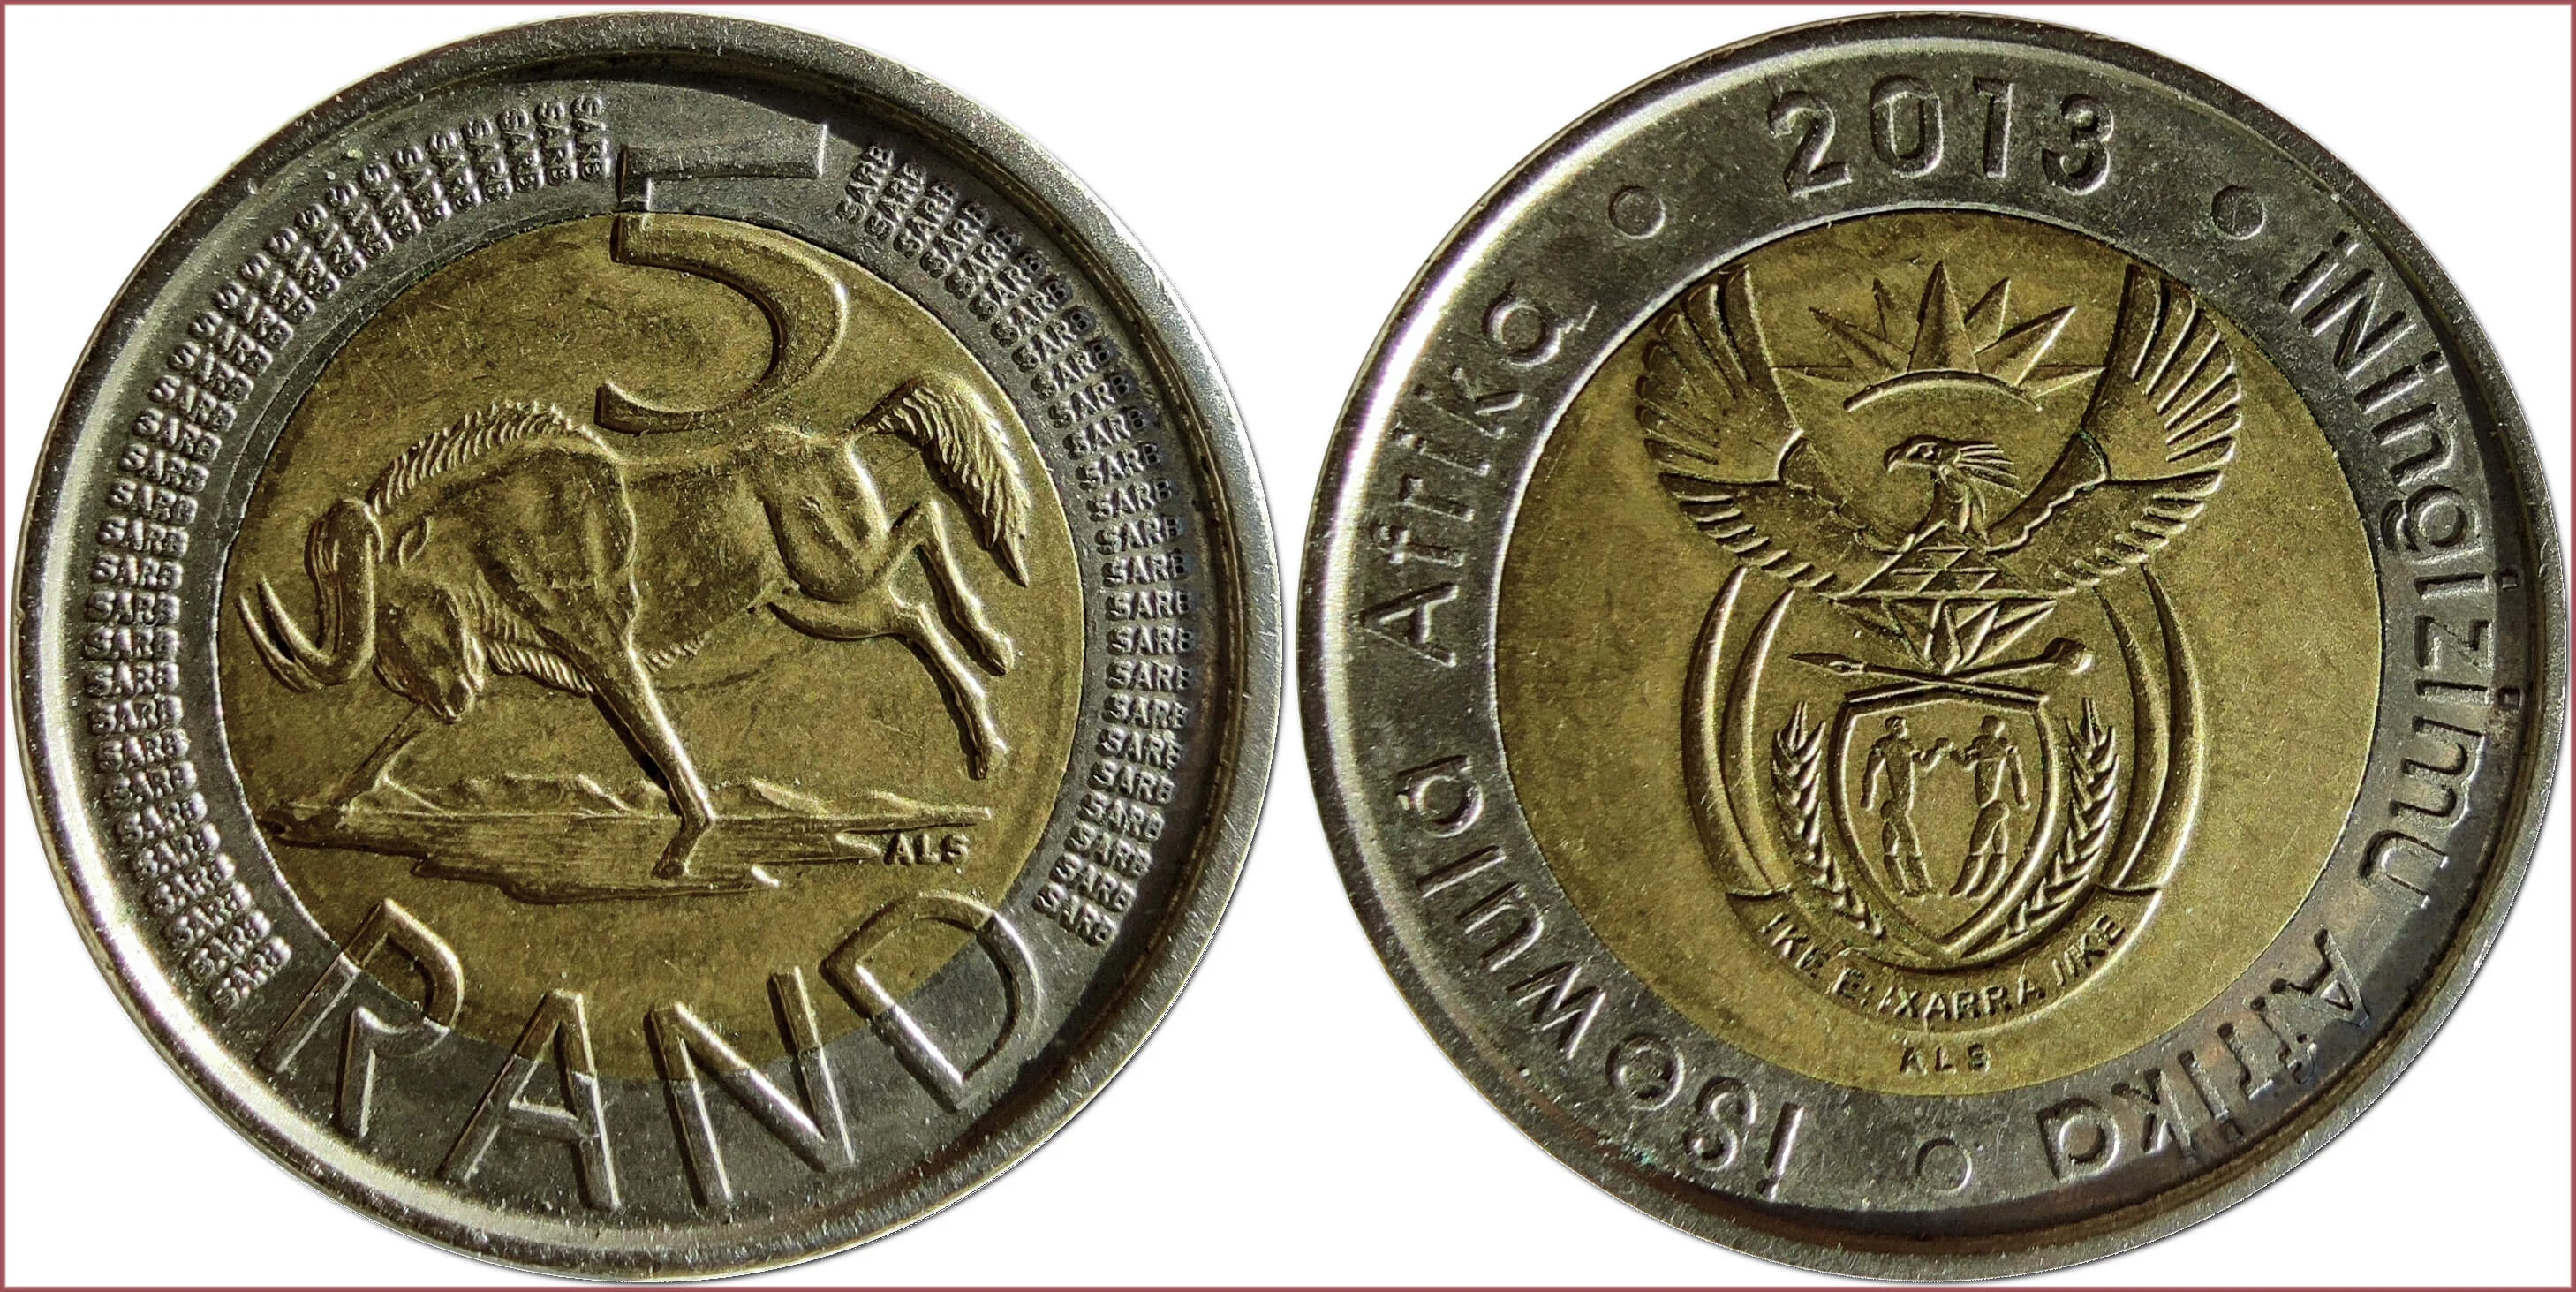 5 rand, 2013: Republic of South Africa